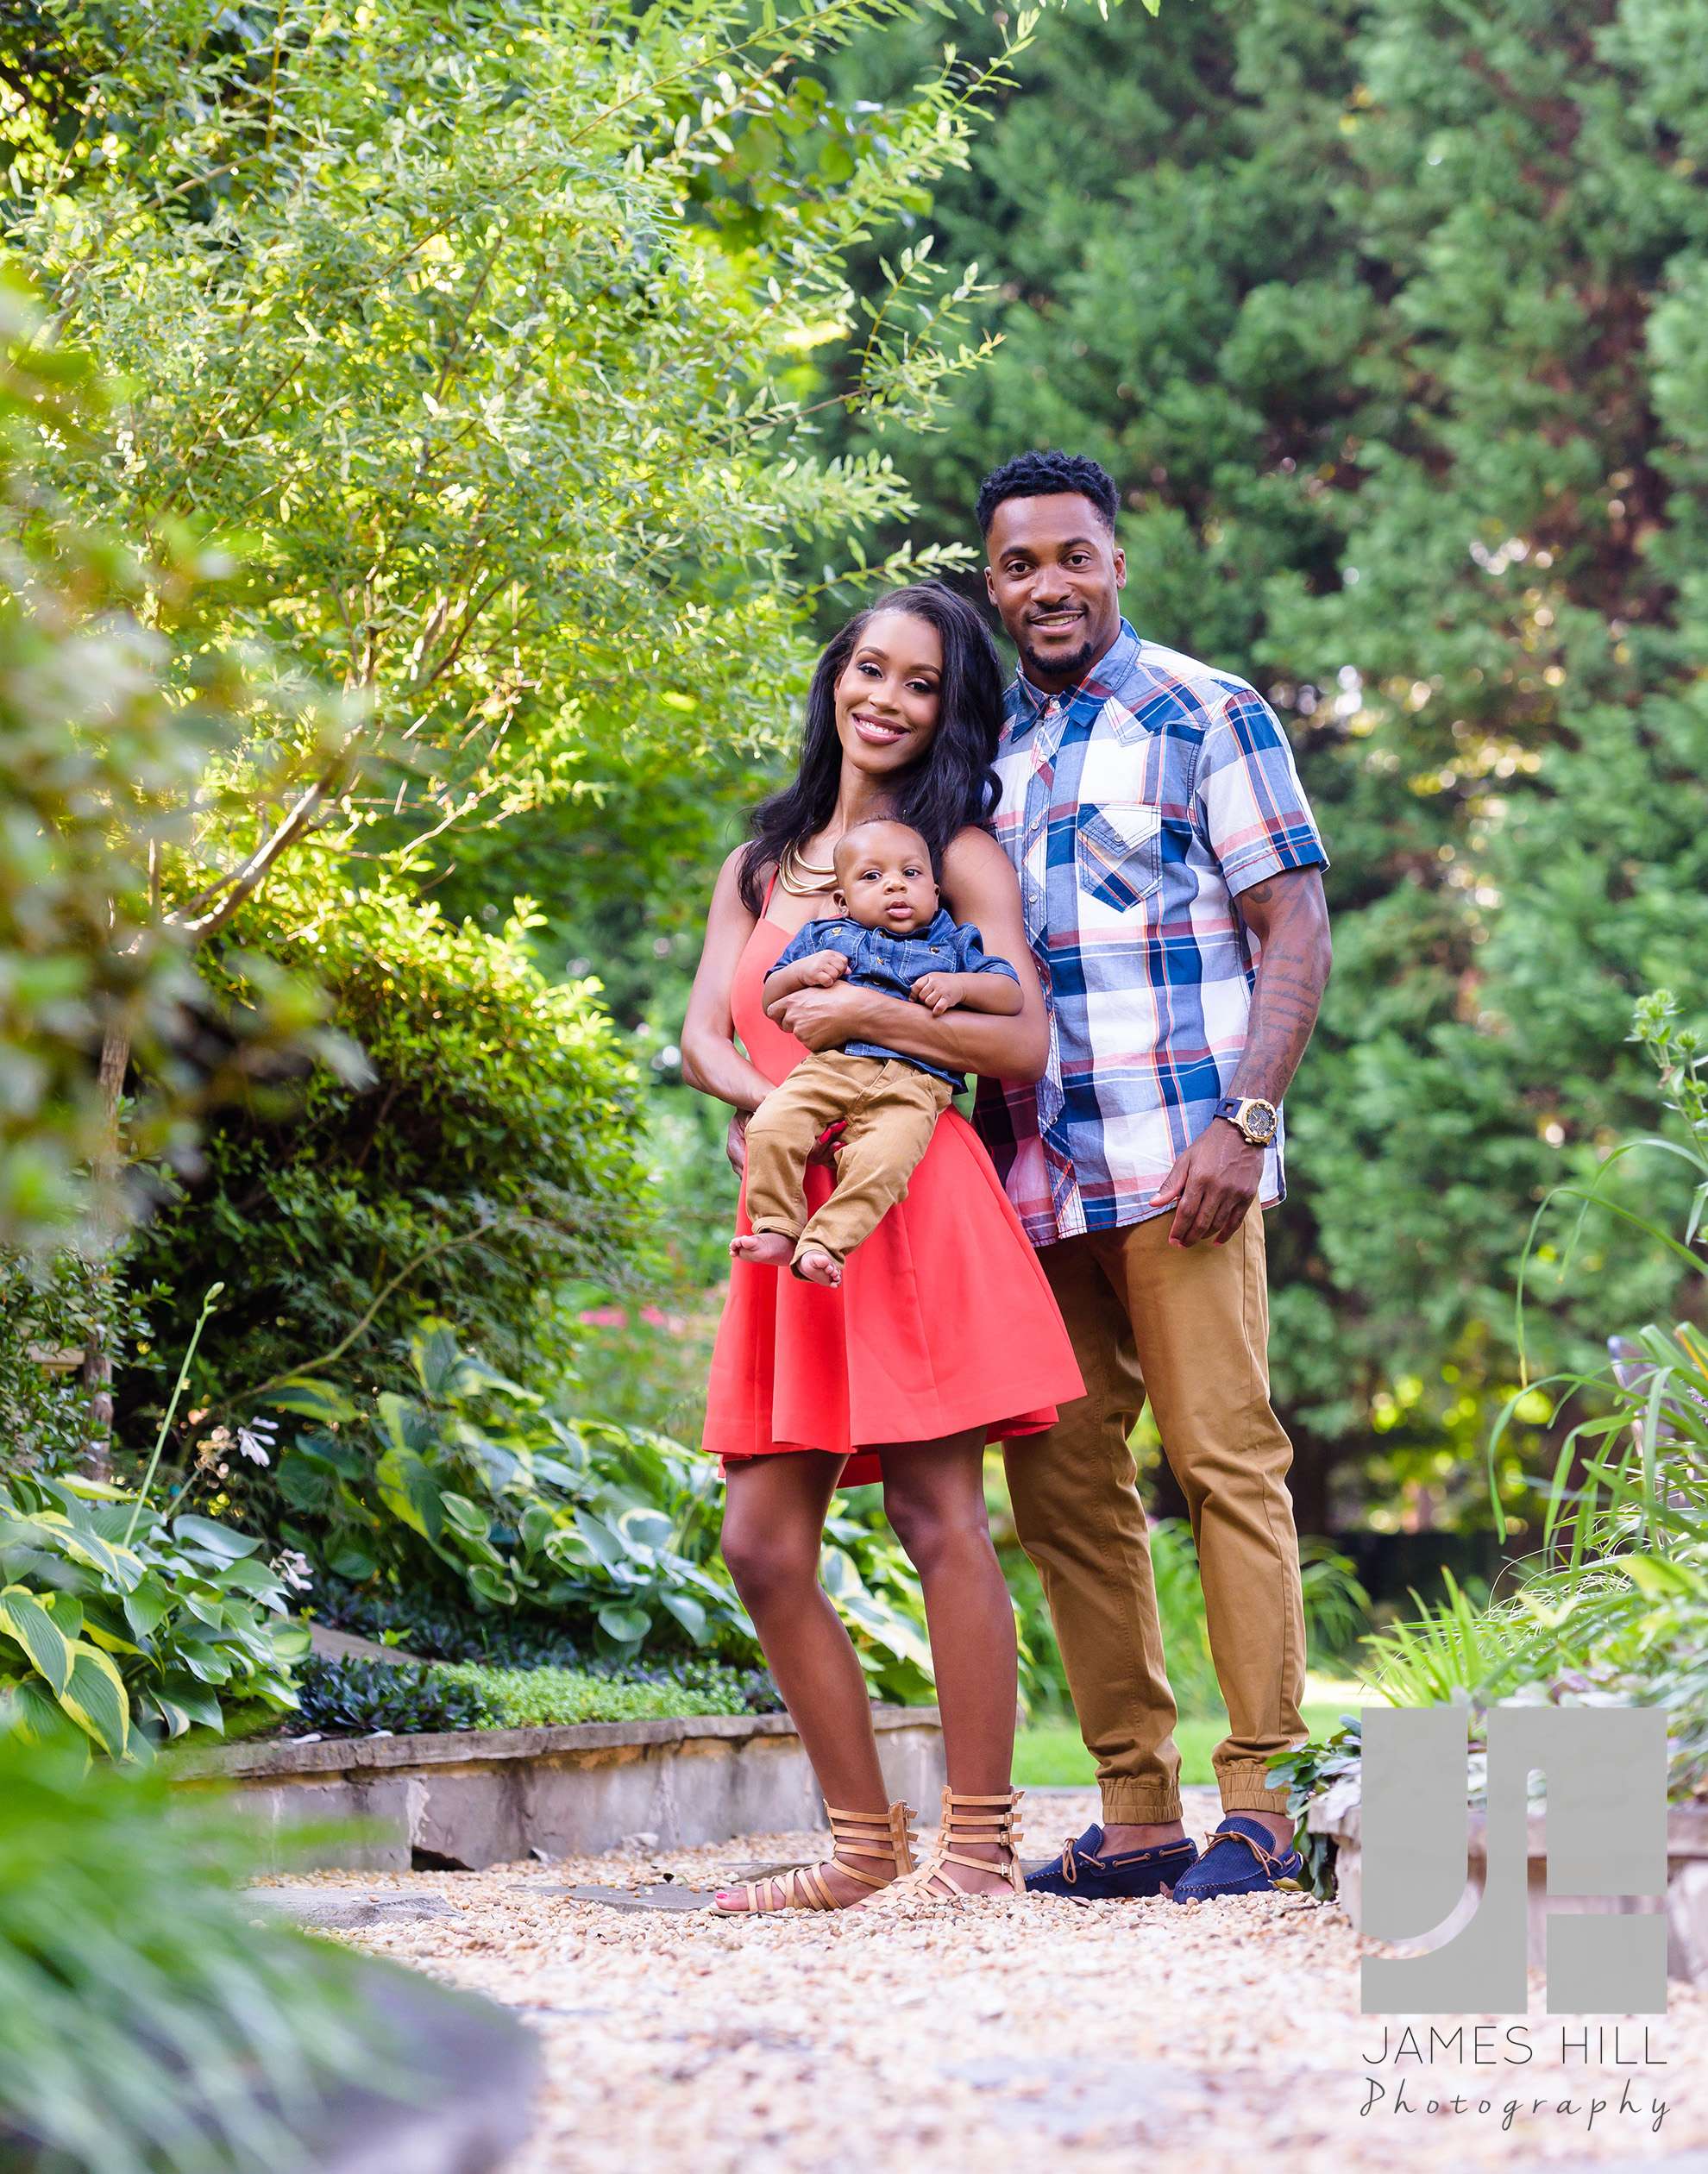 Robert Alford, with Brionne and their beautiful baby boy